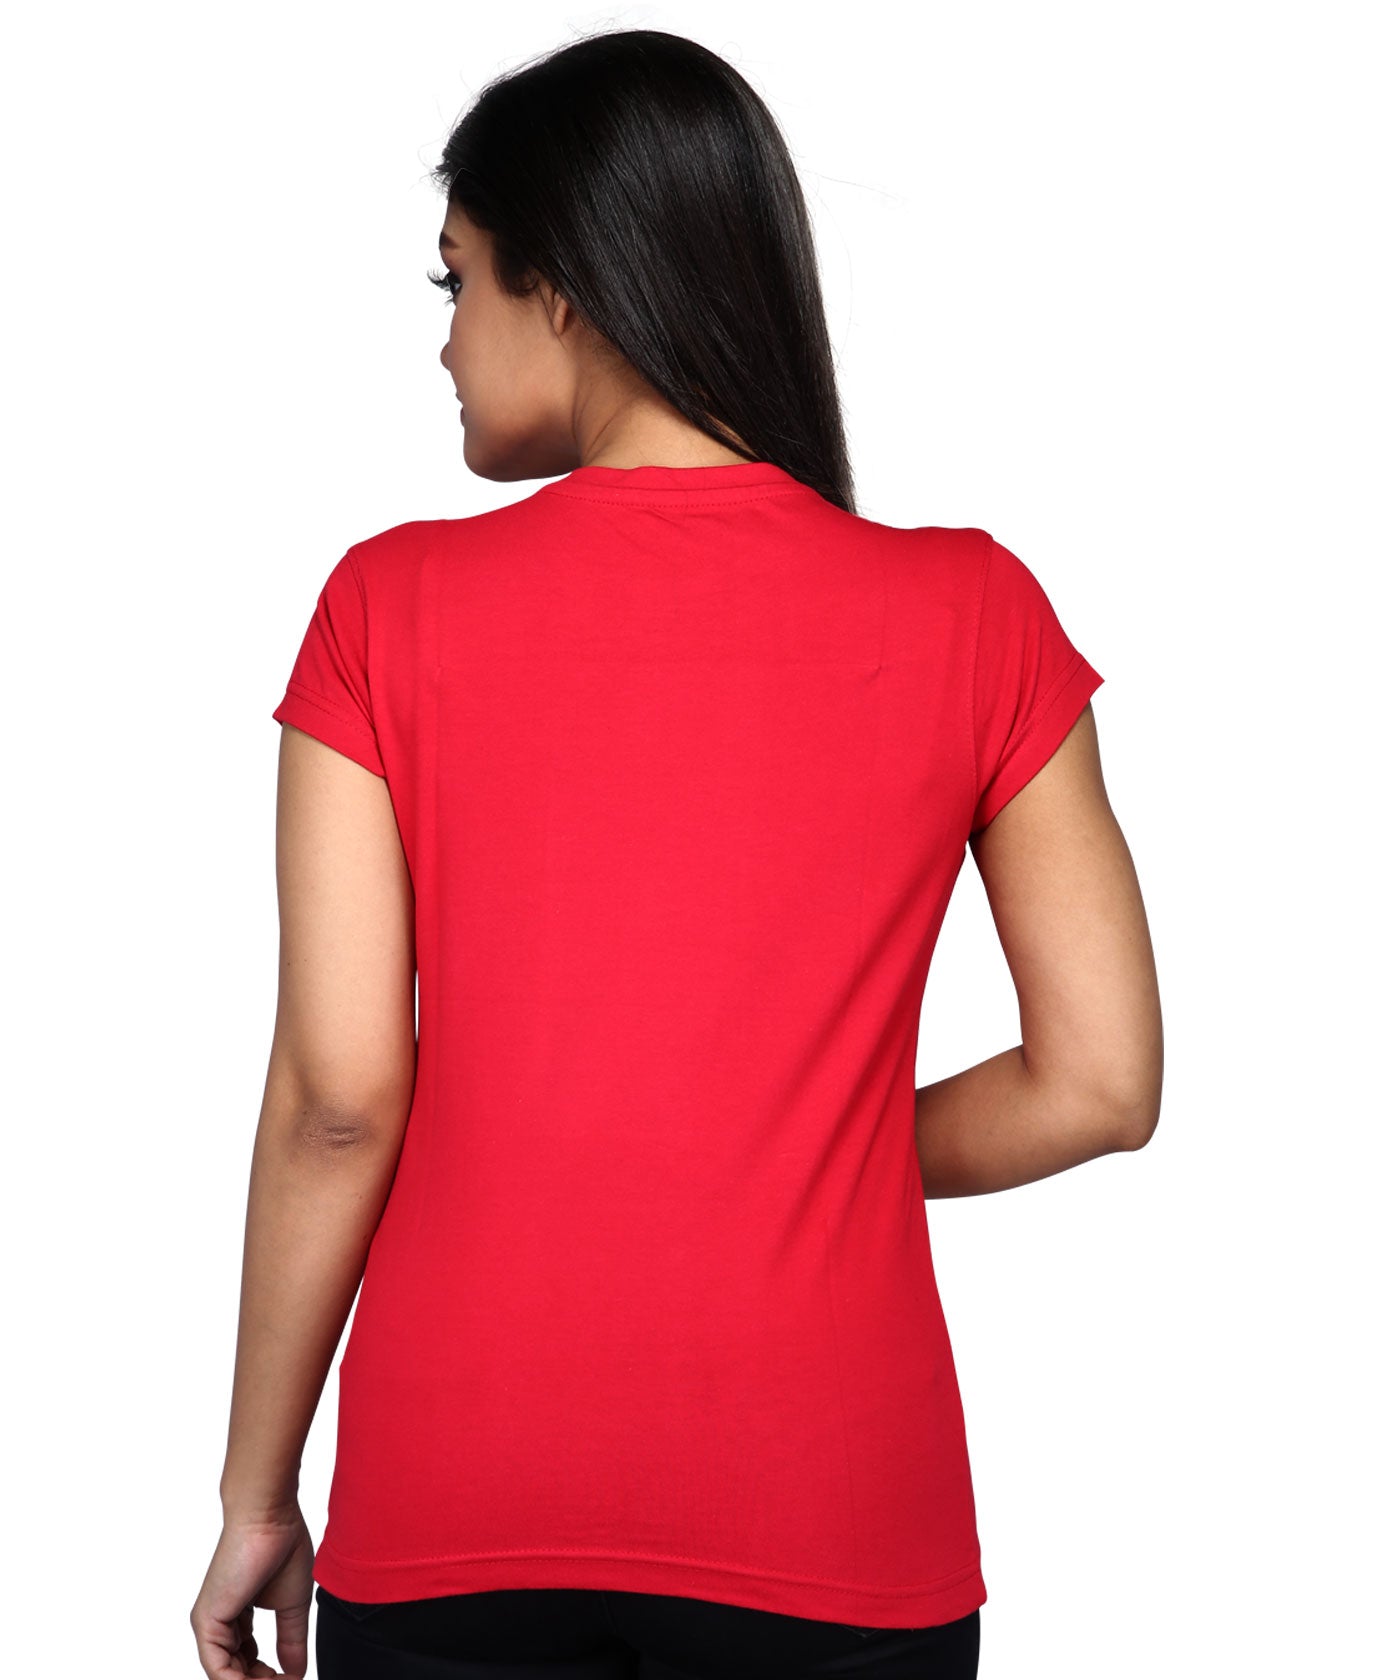 Rose At Right Side - Block Print Tees for Women - Red